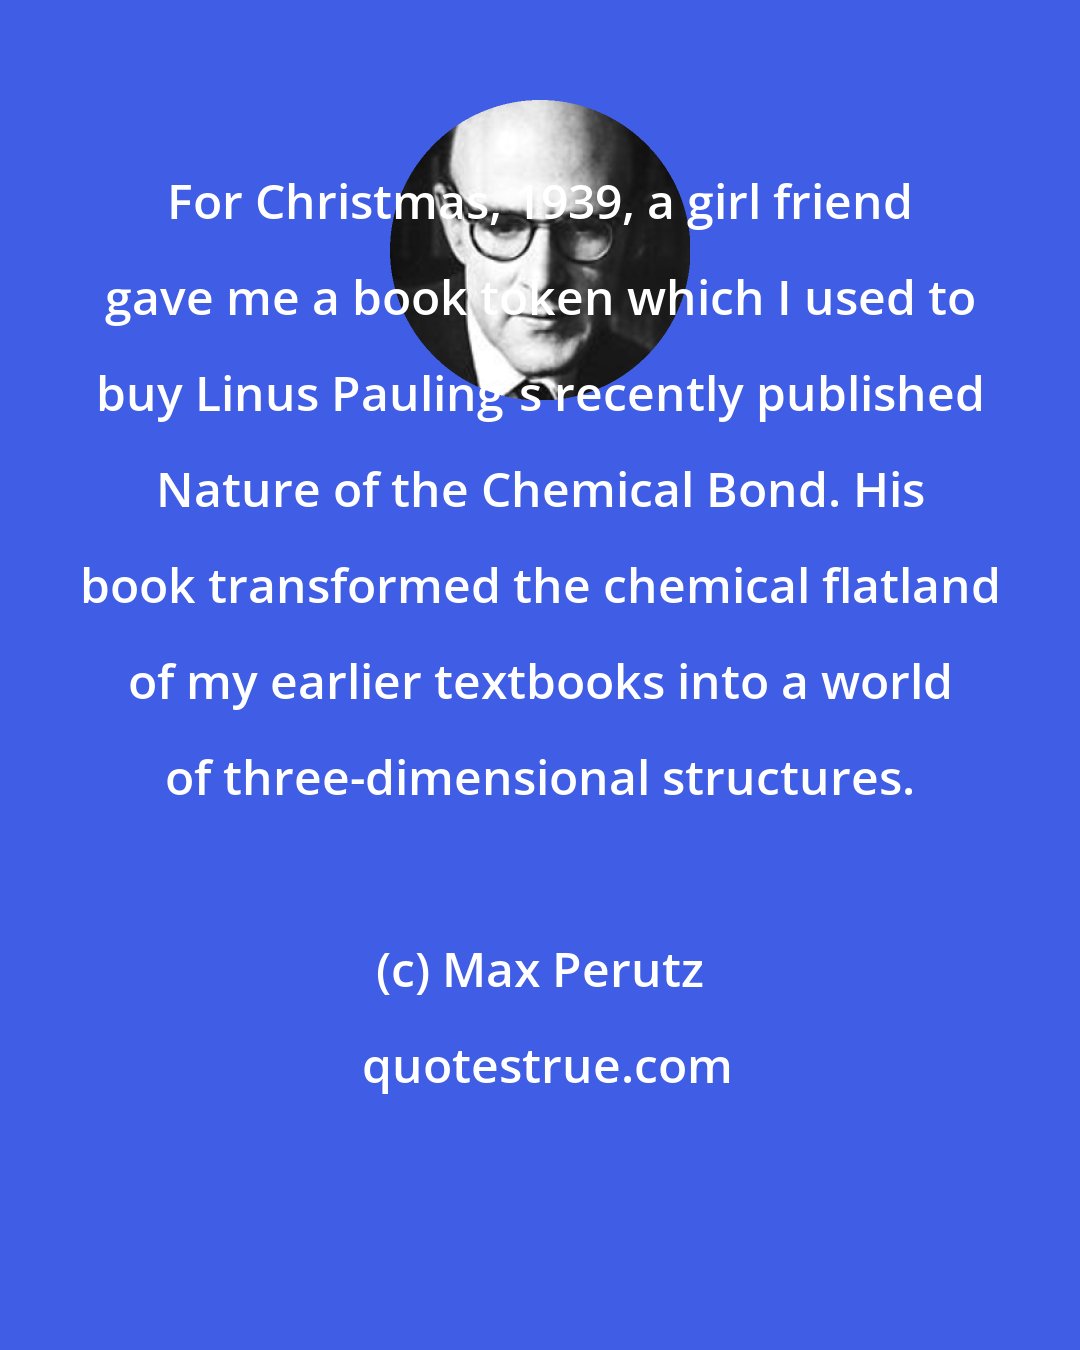 Max Perutz: For Christmas, 1939, a girl friend gave me a book token which I used to buy Linus Pauling's recently published Nature of the Chemical Bond. His book transformed the chemical flatland of my earlier textbooks into a world of three-dimensional structures.